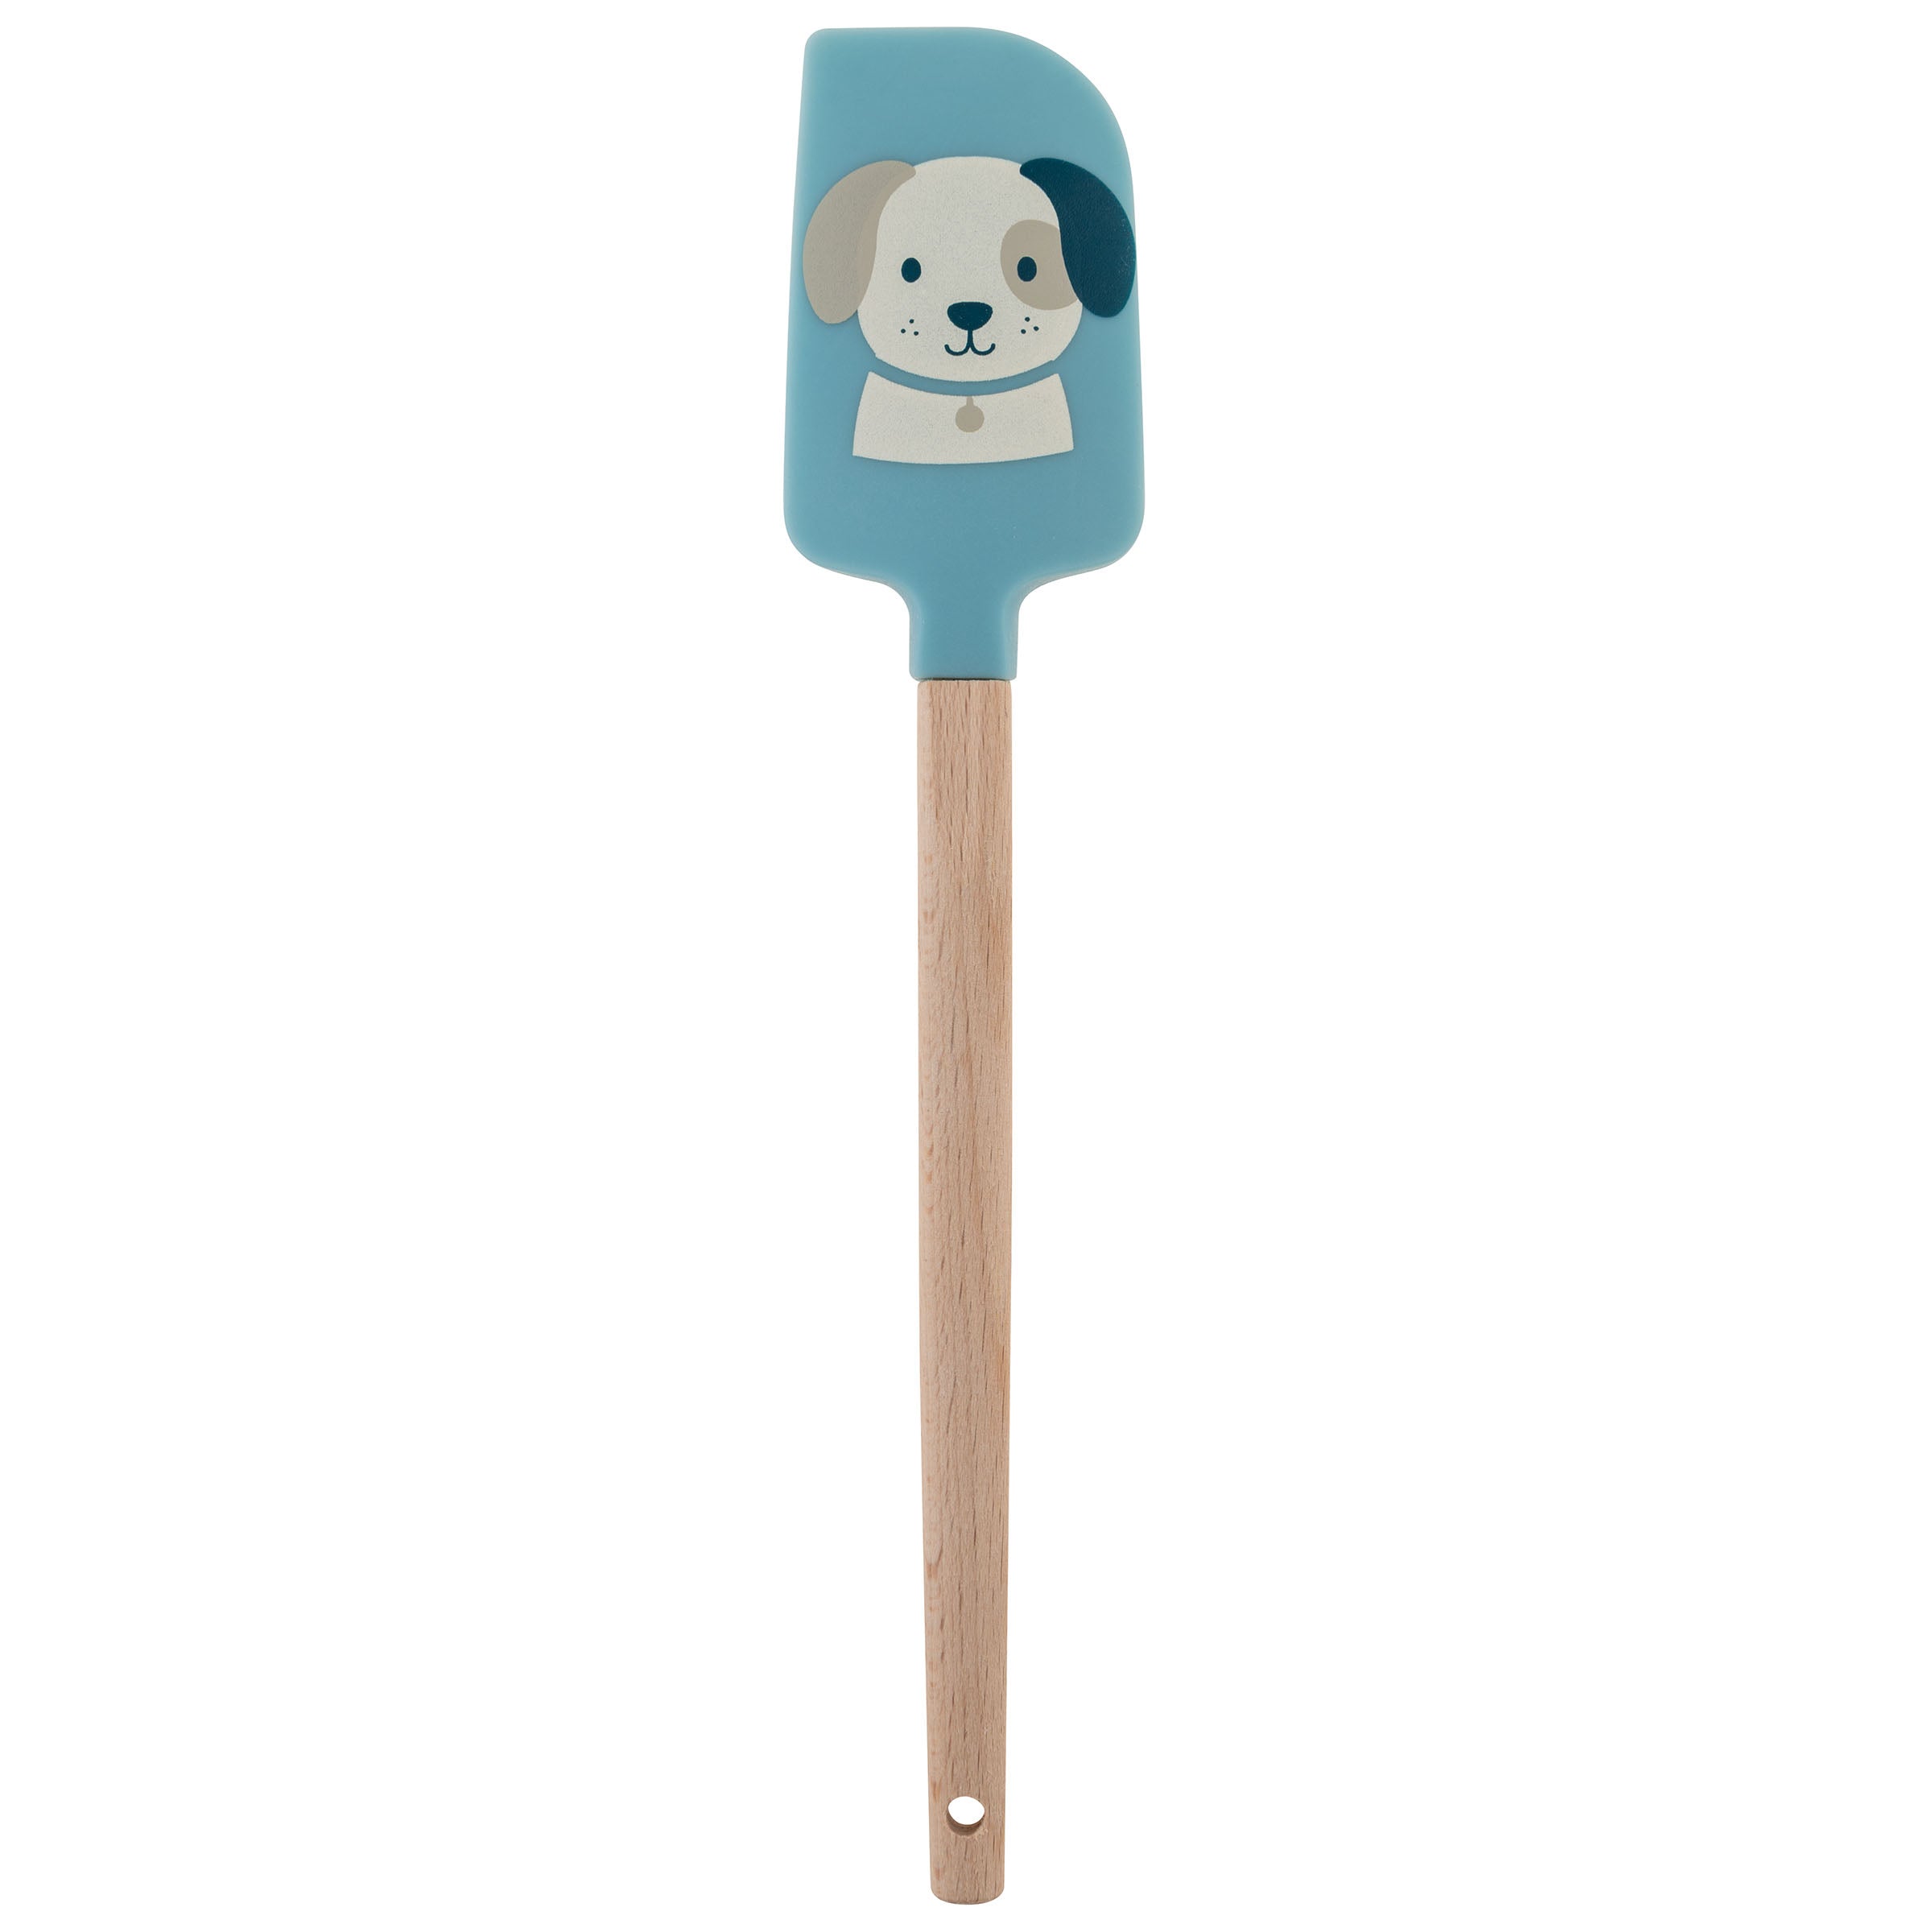 Kids Cookie Cutter With Spatula Set Puppy